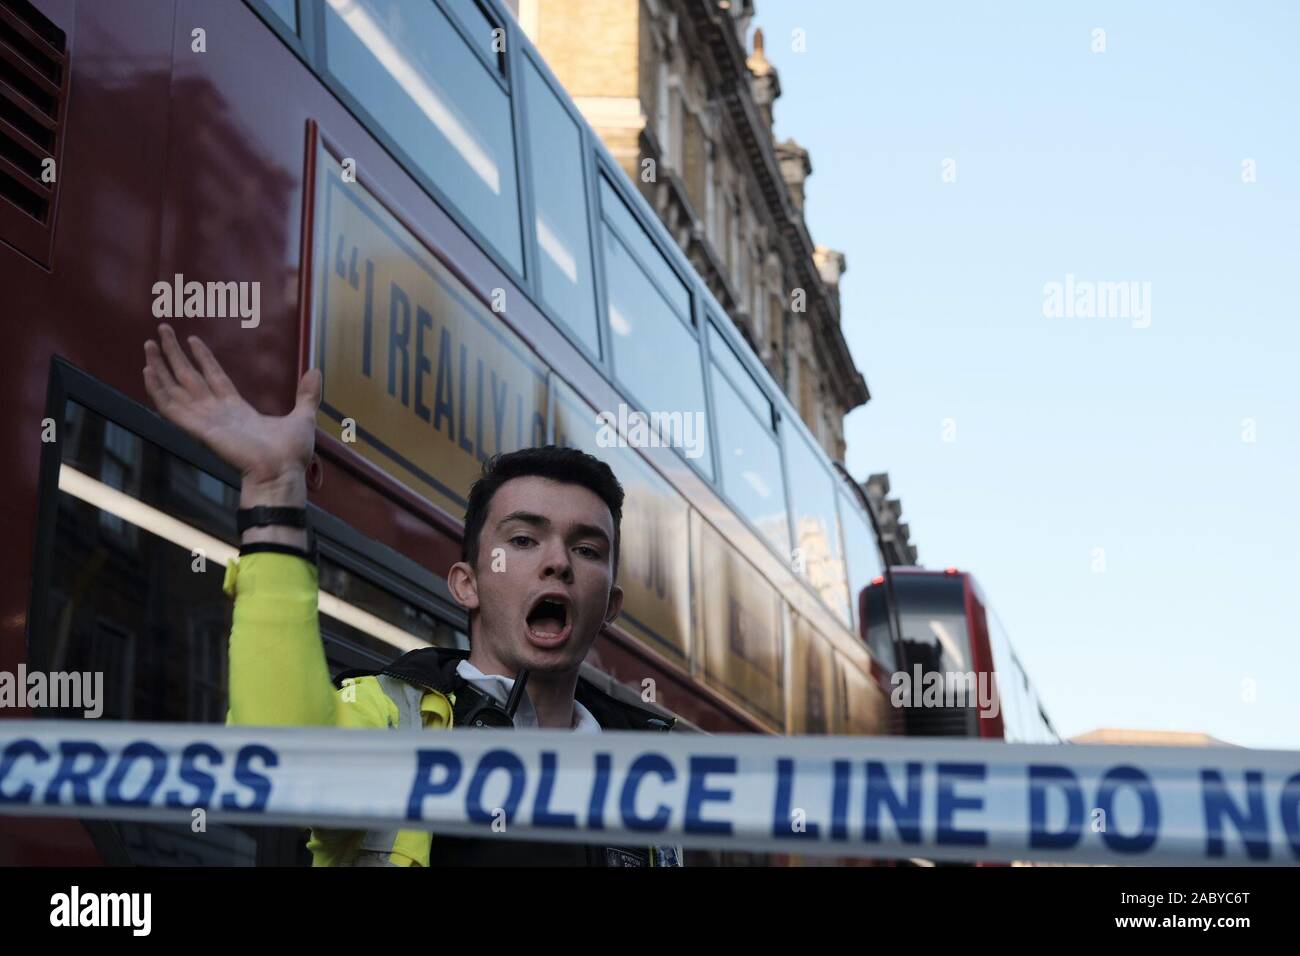 London, UK. 29th Nov 2019. A stabbing attack on London Bridge is being treated by police as 'terror related', the Met has said. A number of people are believed to have been injured in an incident at London Bridge. Credit: RayArt Graphics/Alamy Live News Stock Photo